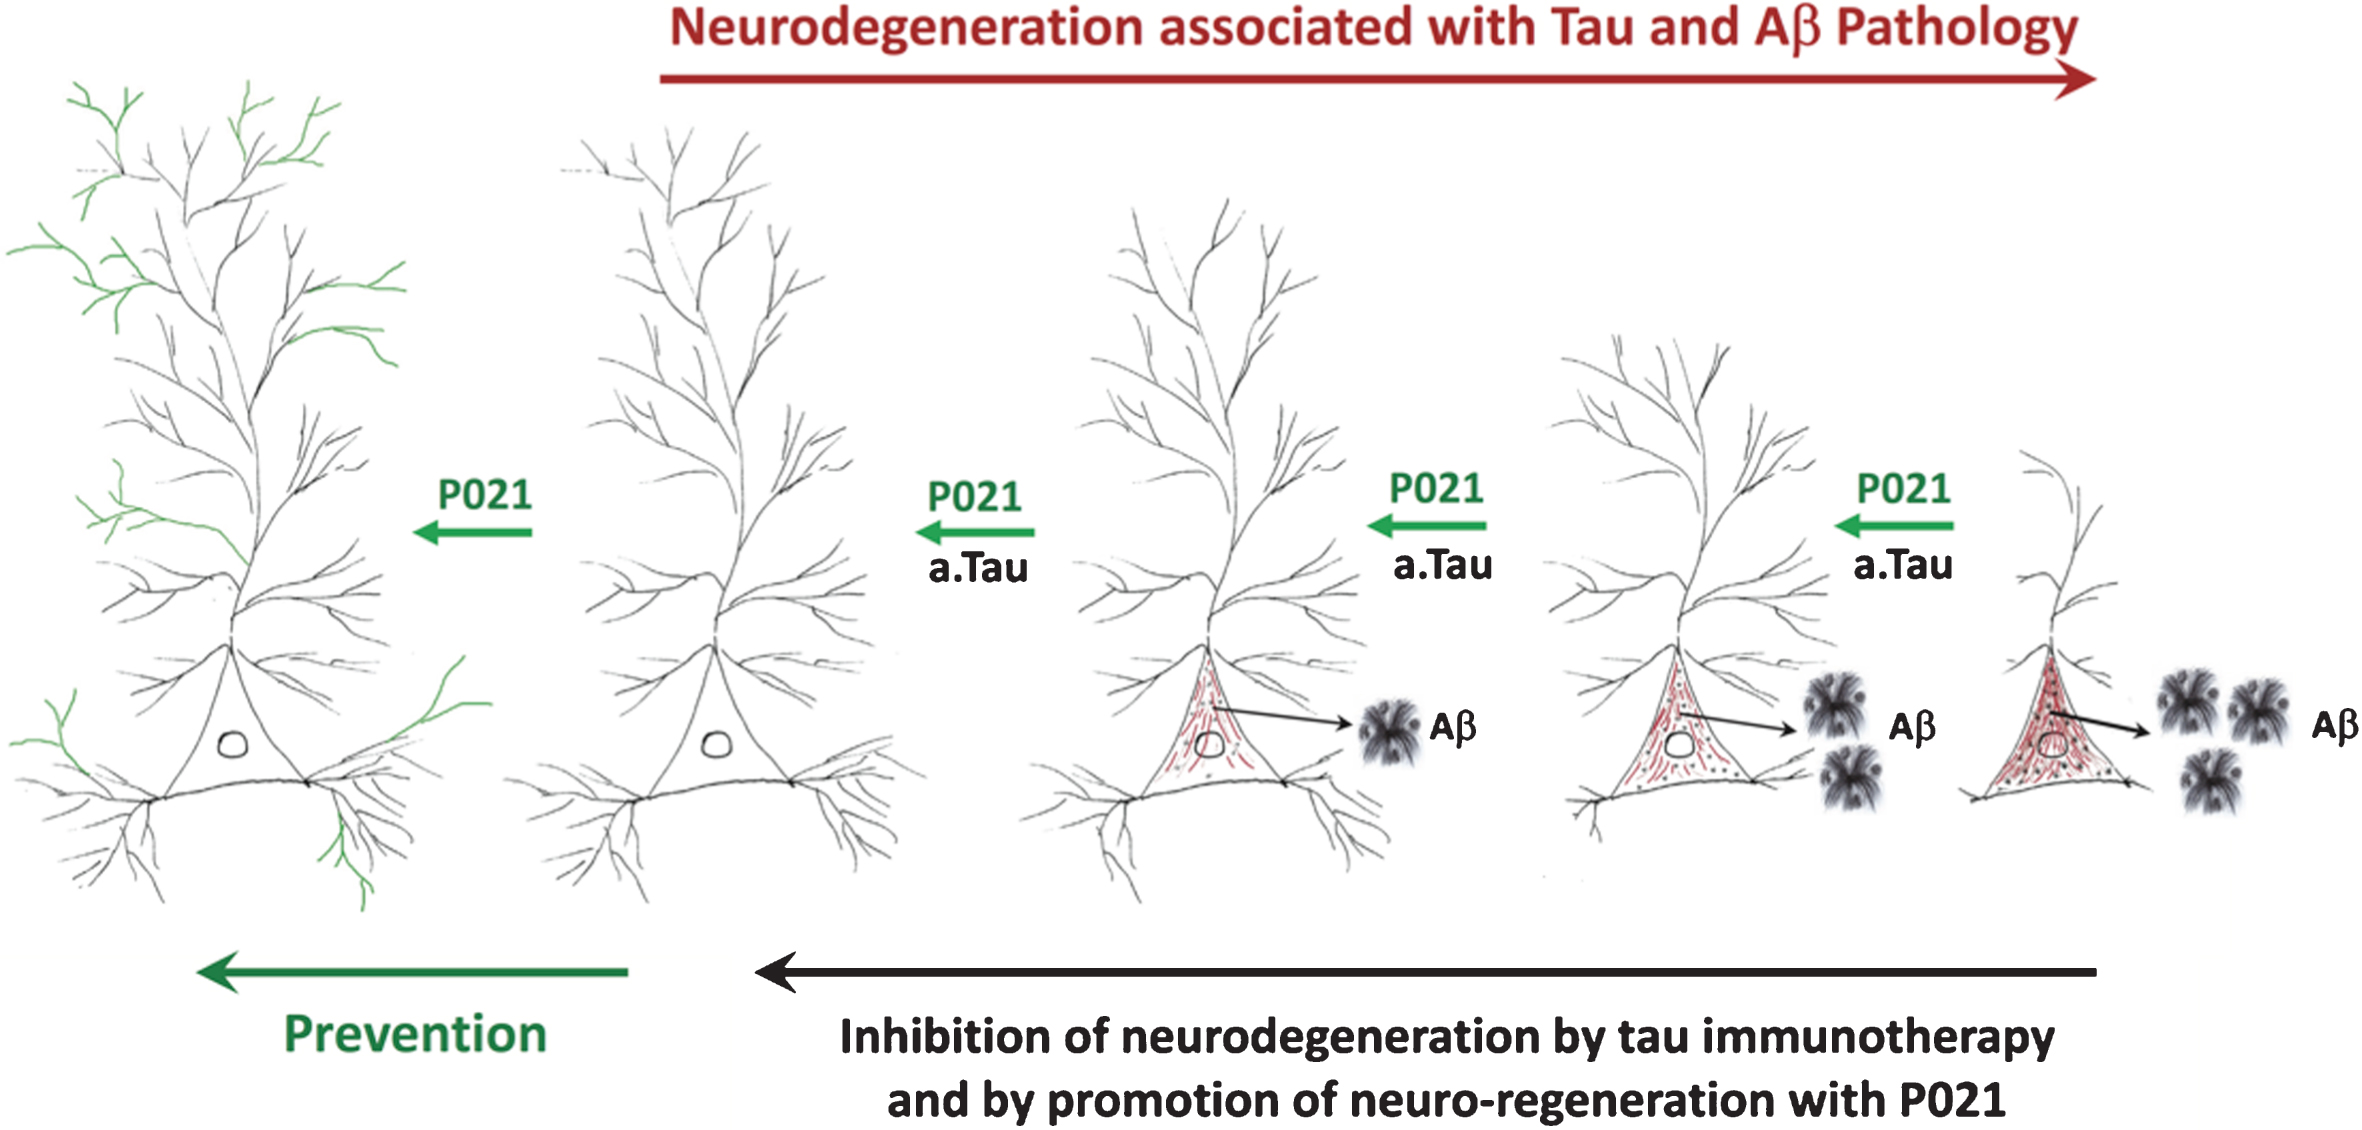 A diagrammatic representation of AD neurofibrillary degeneration and beneficial therapeutic effect of neurotrophic compound P021 and immunization with antibodies to amino-terminal projection domain of tau. Dendrite and synaptic degeneration associated with formation of intraneuronal tau (in red) and Aβ (intraneuronal as black dots and extracellular as plaques) pathologies is a hallmark of AD. Increase in dendritogenesis and synaptogenesis (shown in green) can prevent loss of neuronal connectivity and thereby inhibit tau and Aβ pathologies, especially if the neurotrophic support such as P021is provided before any pathology. Clearance of tau pathology by passive immunization probably rescues neuronal connectivity deficit and consequently prevents Aβ pathology by inhibiting the amyloidogenic processing of AβPP. a.tau, anti tau.